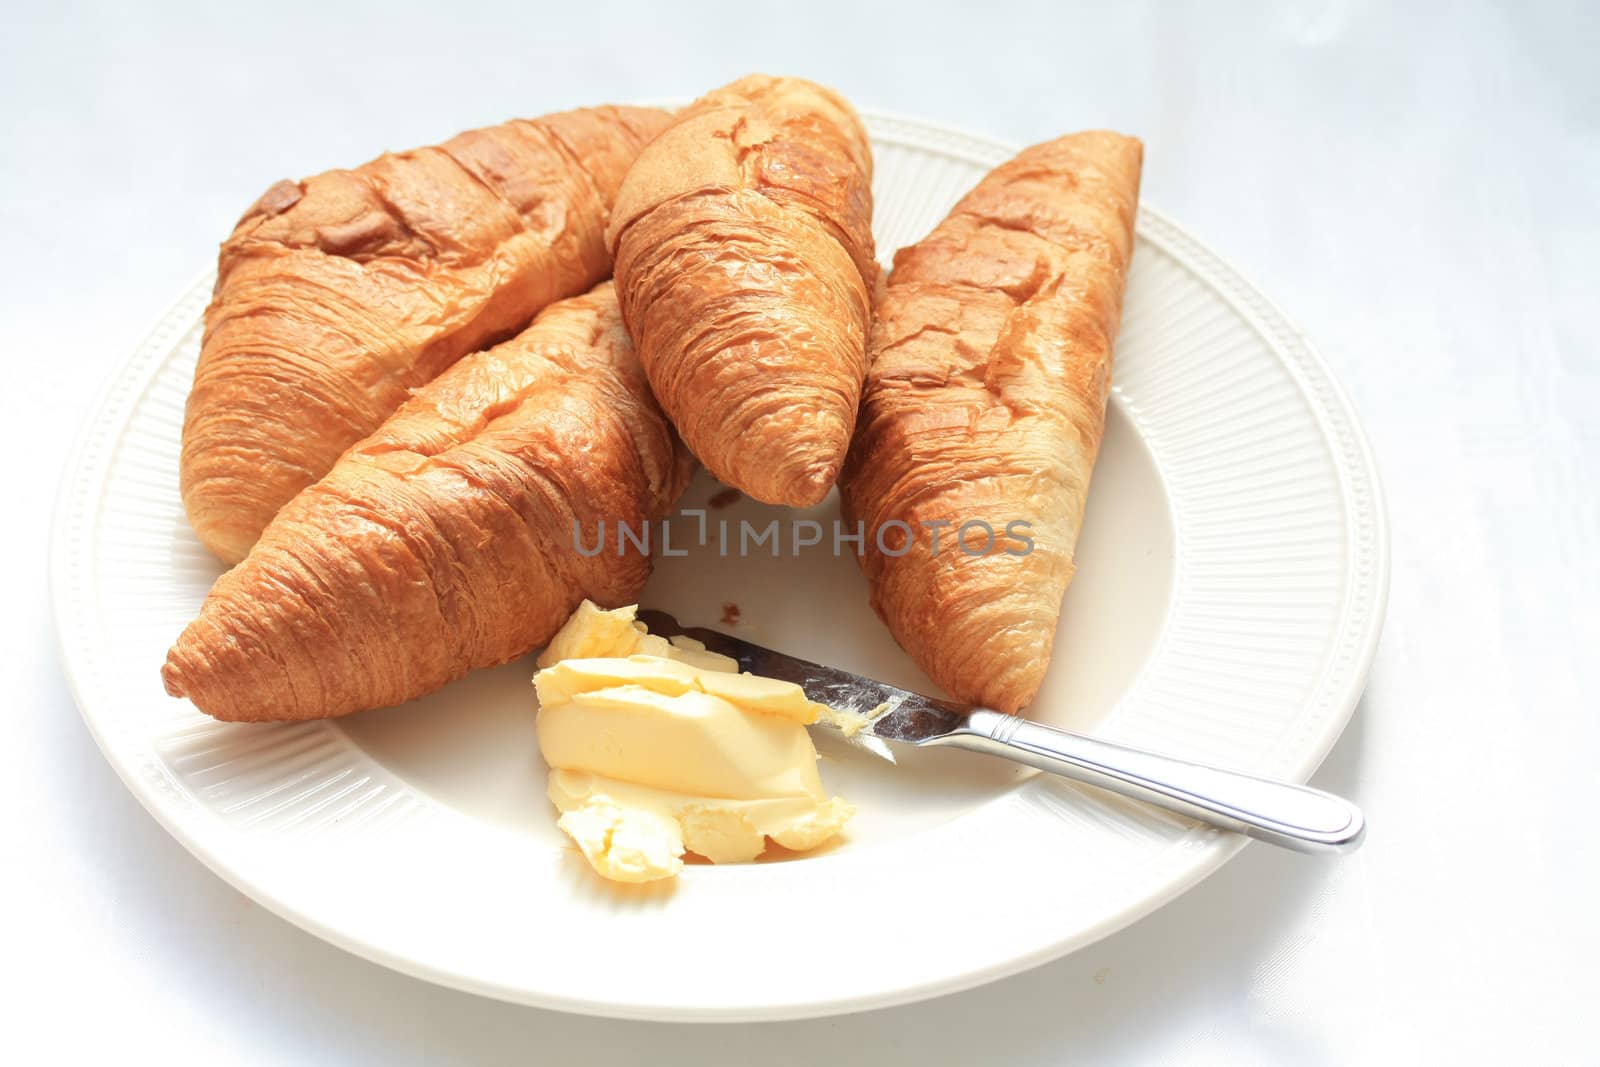 Typical french breakfast: croissants with butter